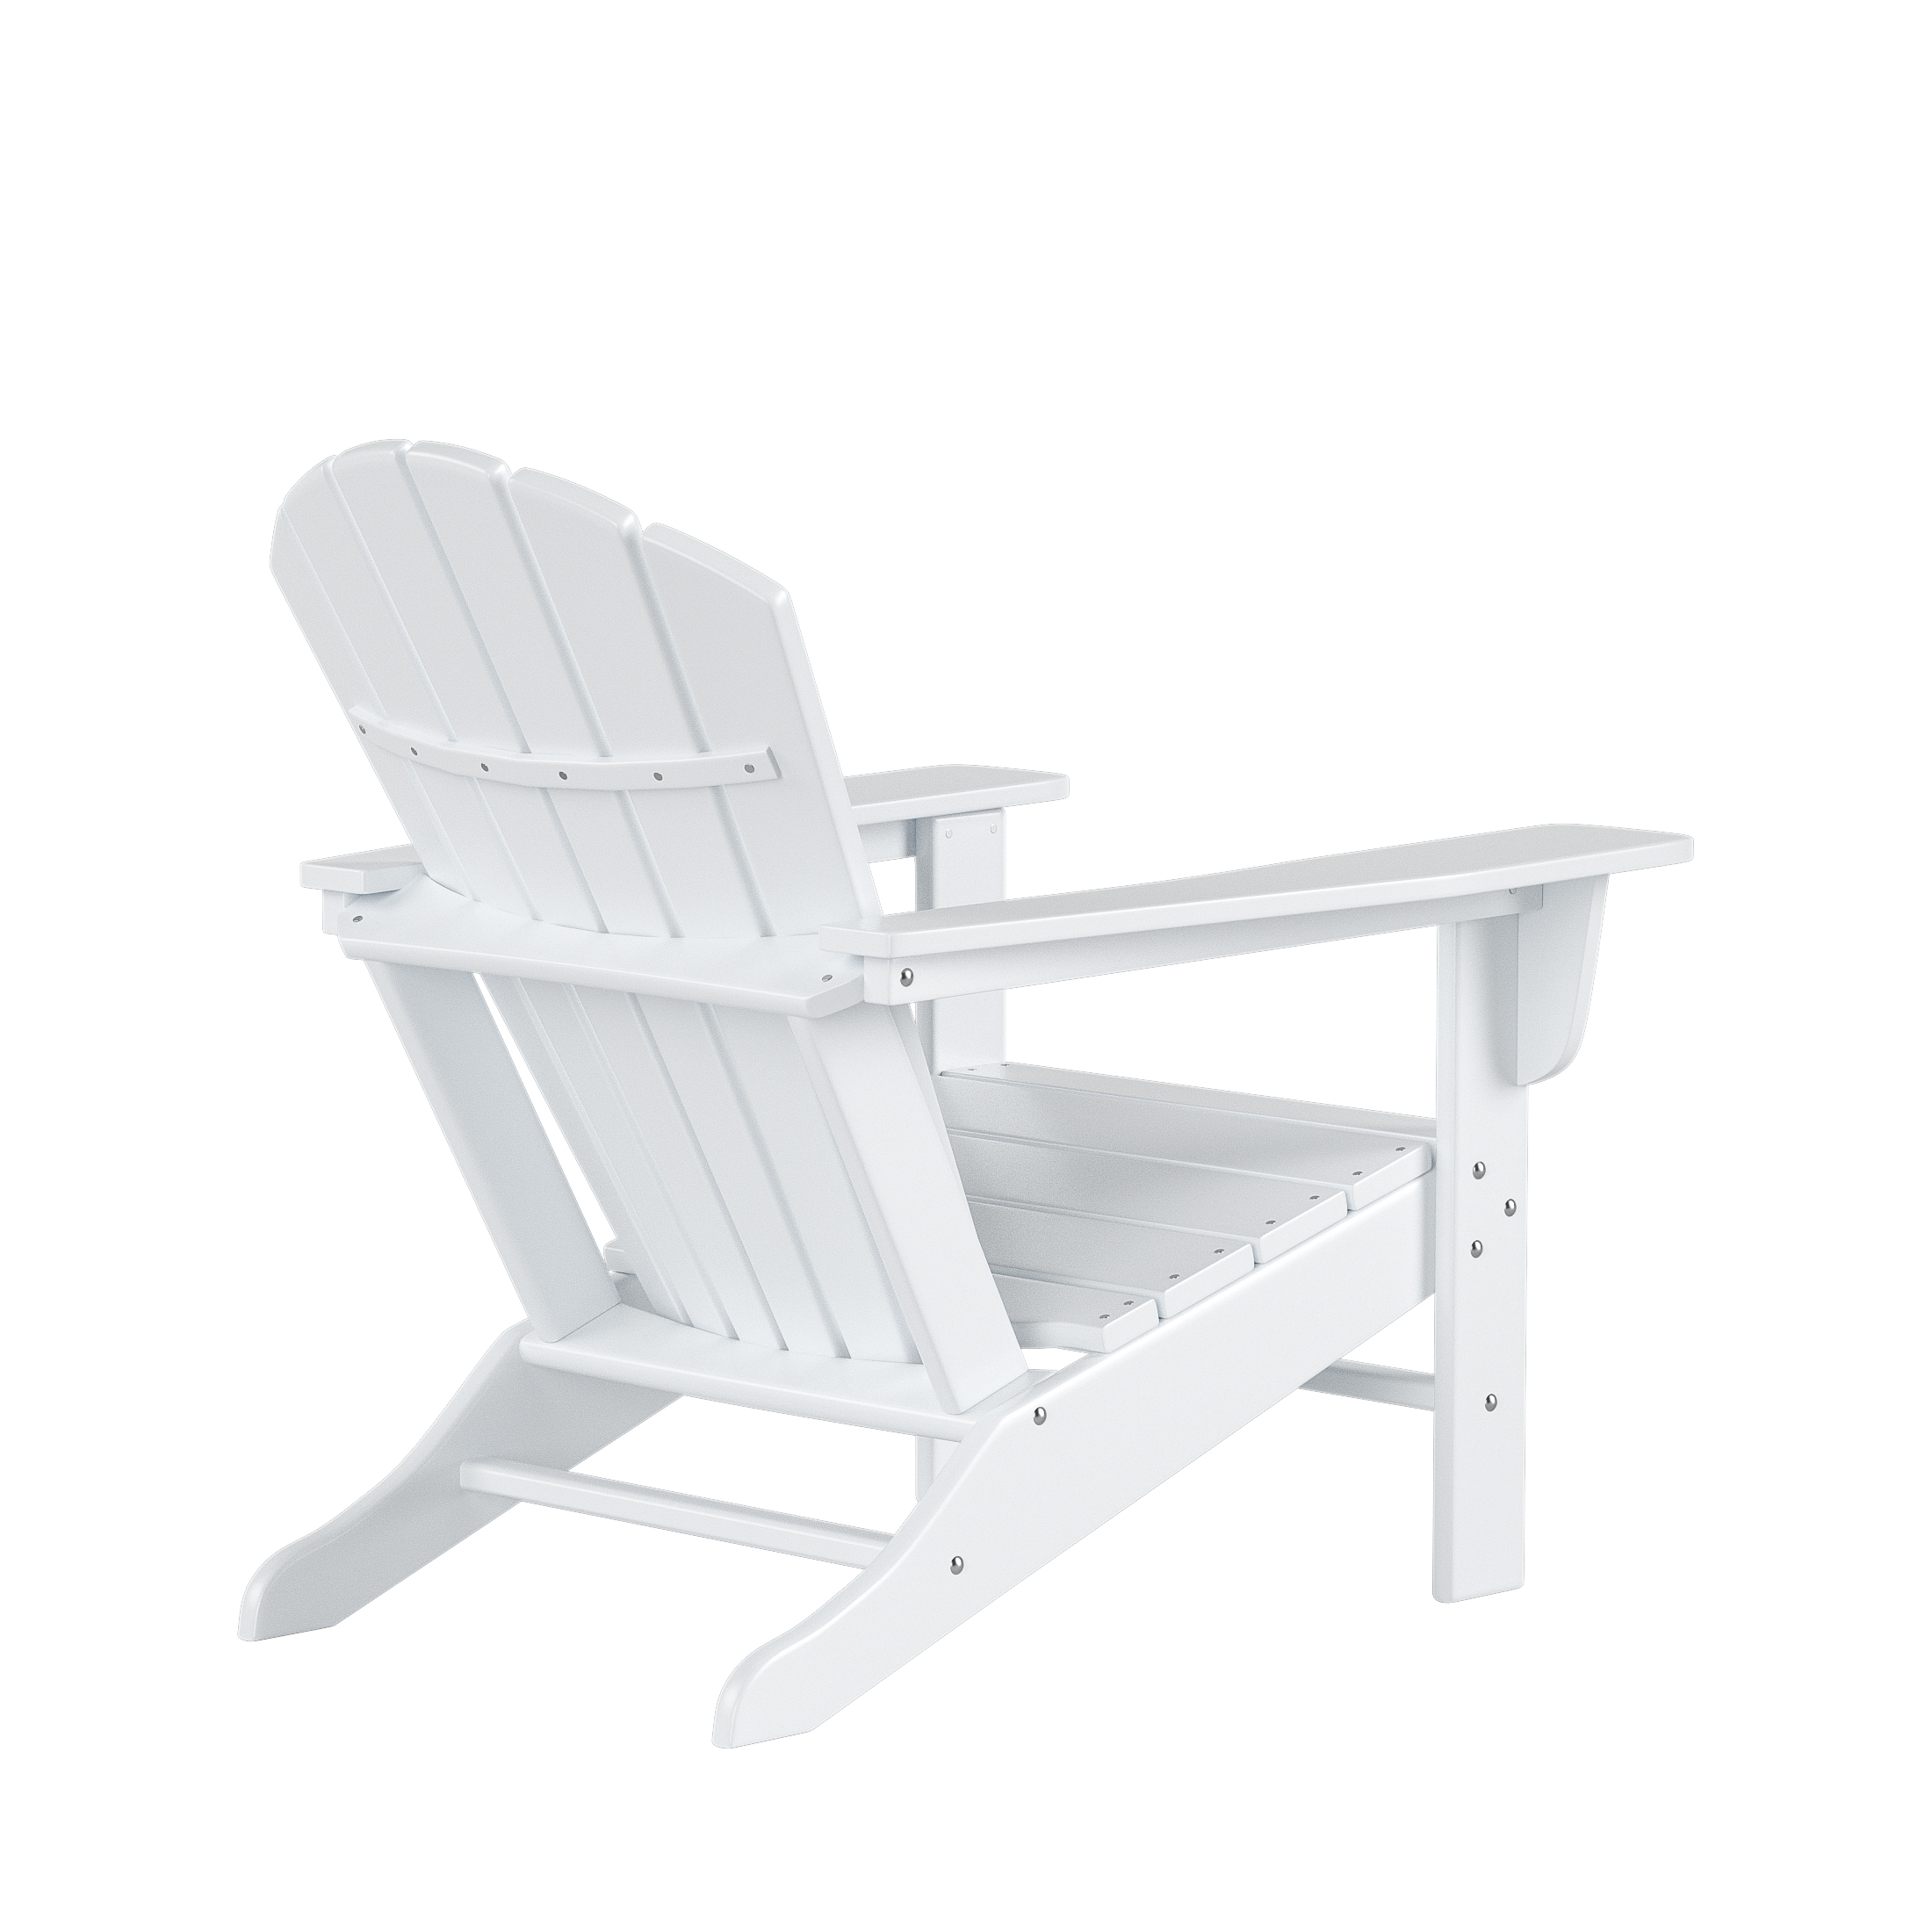 Westin Outdoor with Side Table HDPE Plastic Adirondack Chair - White (Set of 2) - image 4 of 5